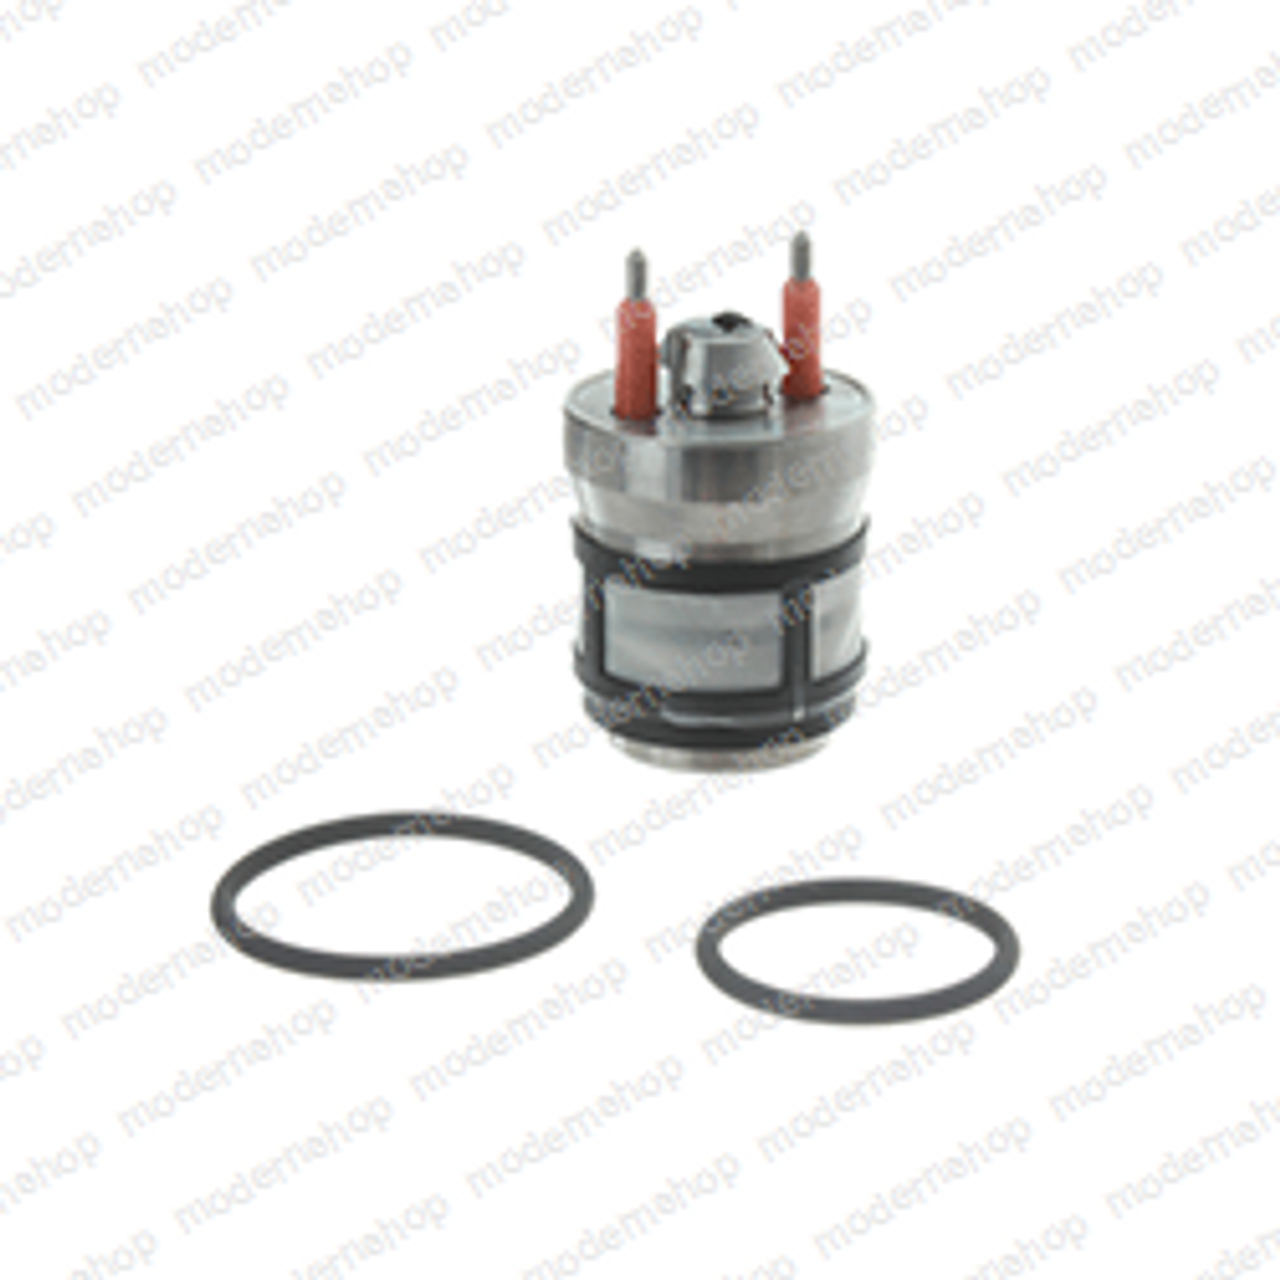 C282-8: Nissan Forklift INJECTOR - LPG W/ O-RINGS